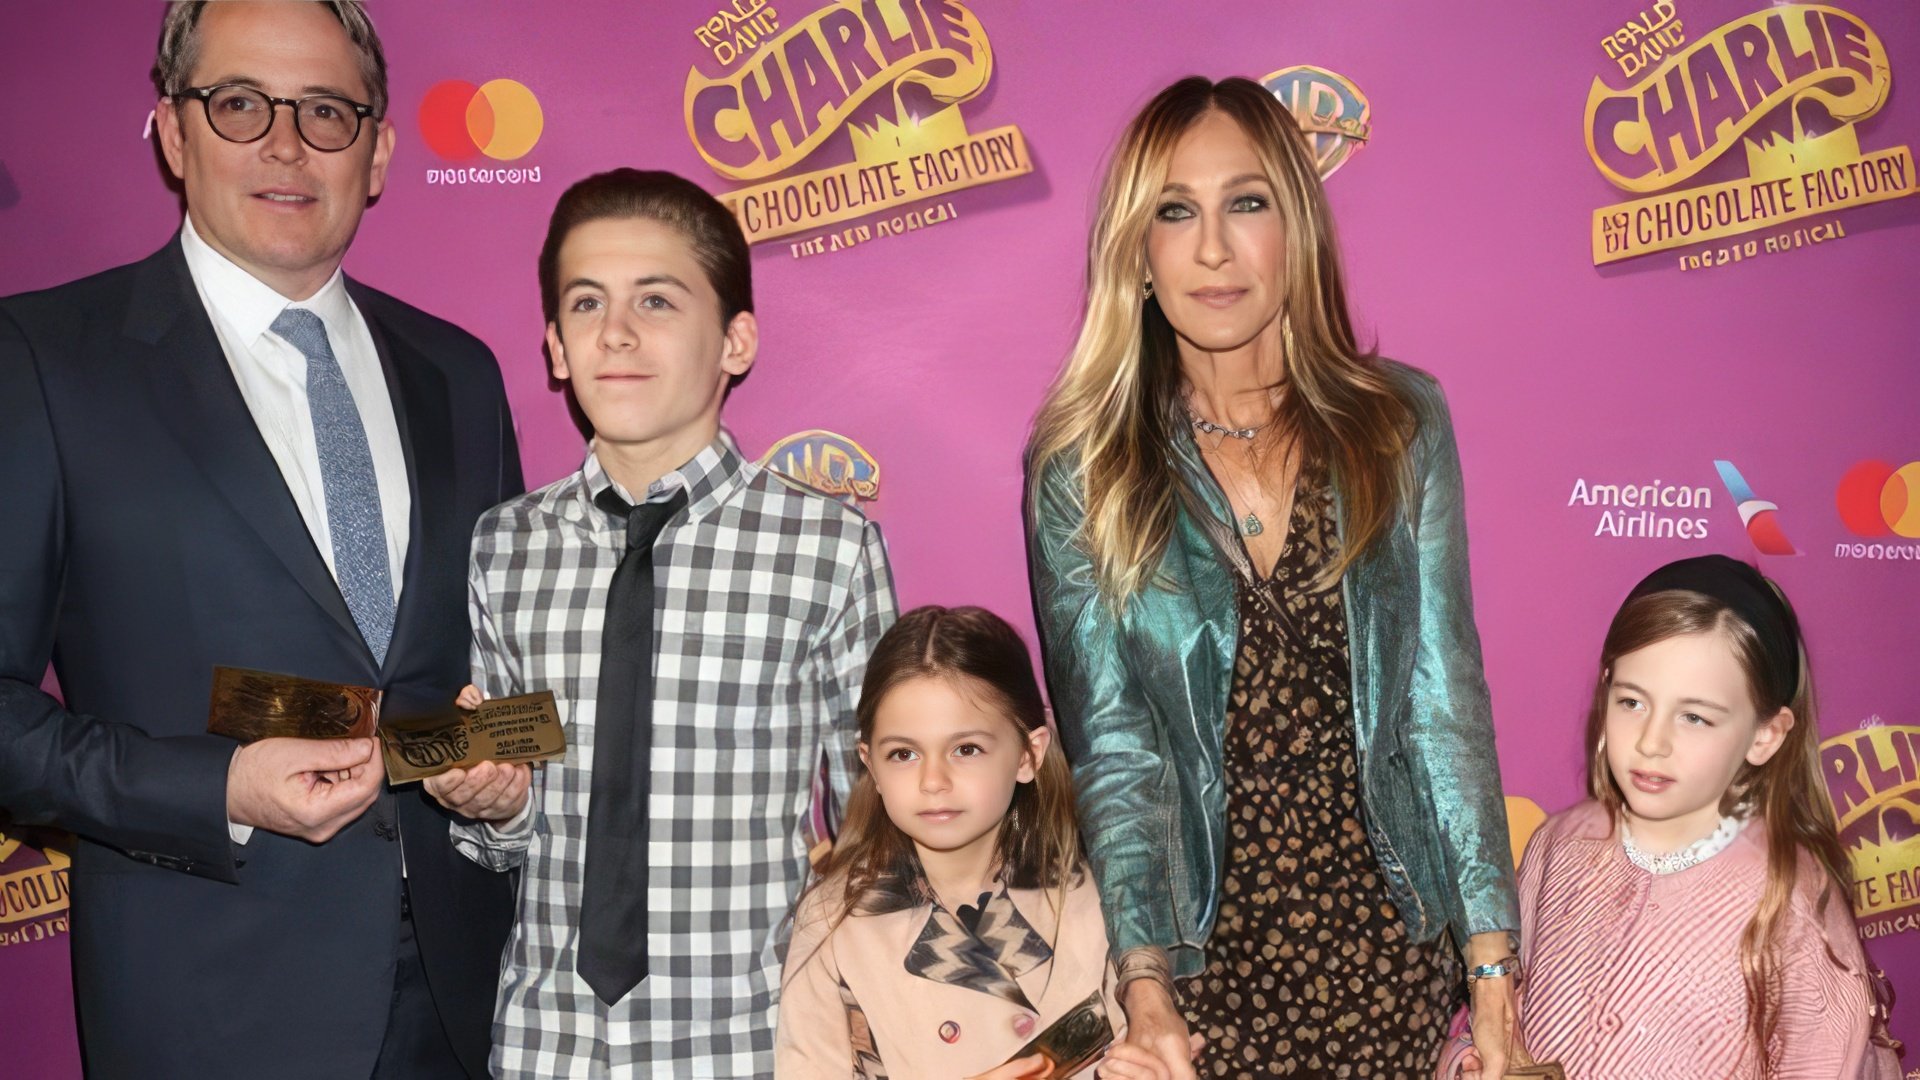 Sarah Jessica Parker with her husband and children